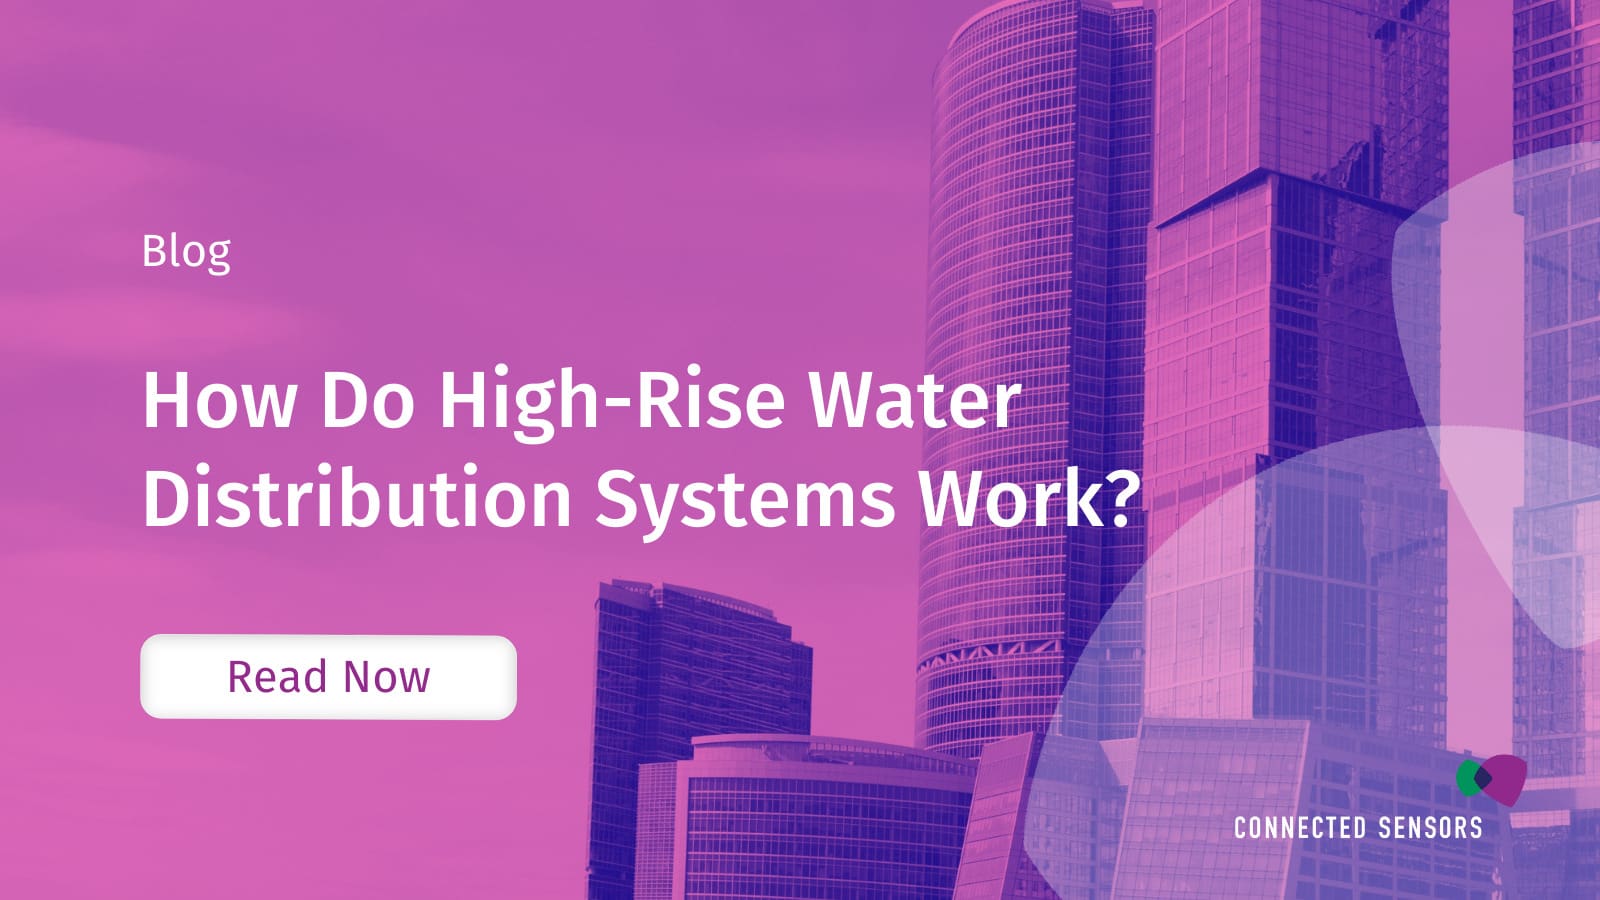 How do High-Rise Water Distribution Systems Work?